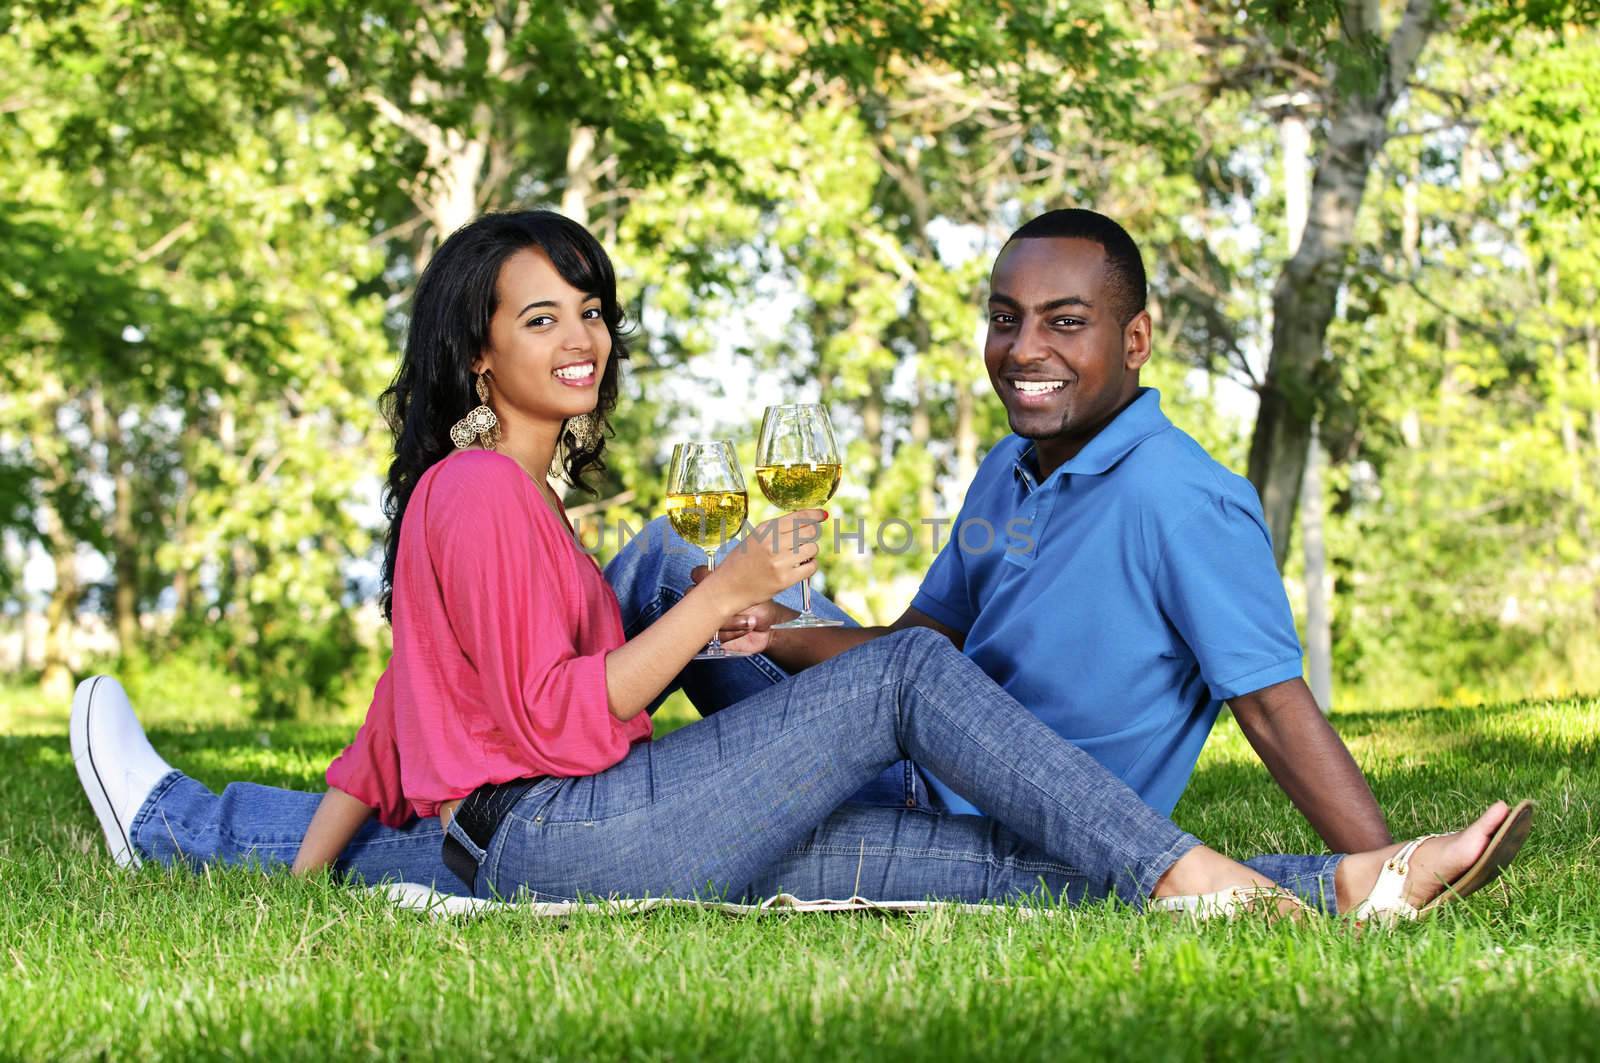 Young romantic couple celebrating with wine in summer park